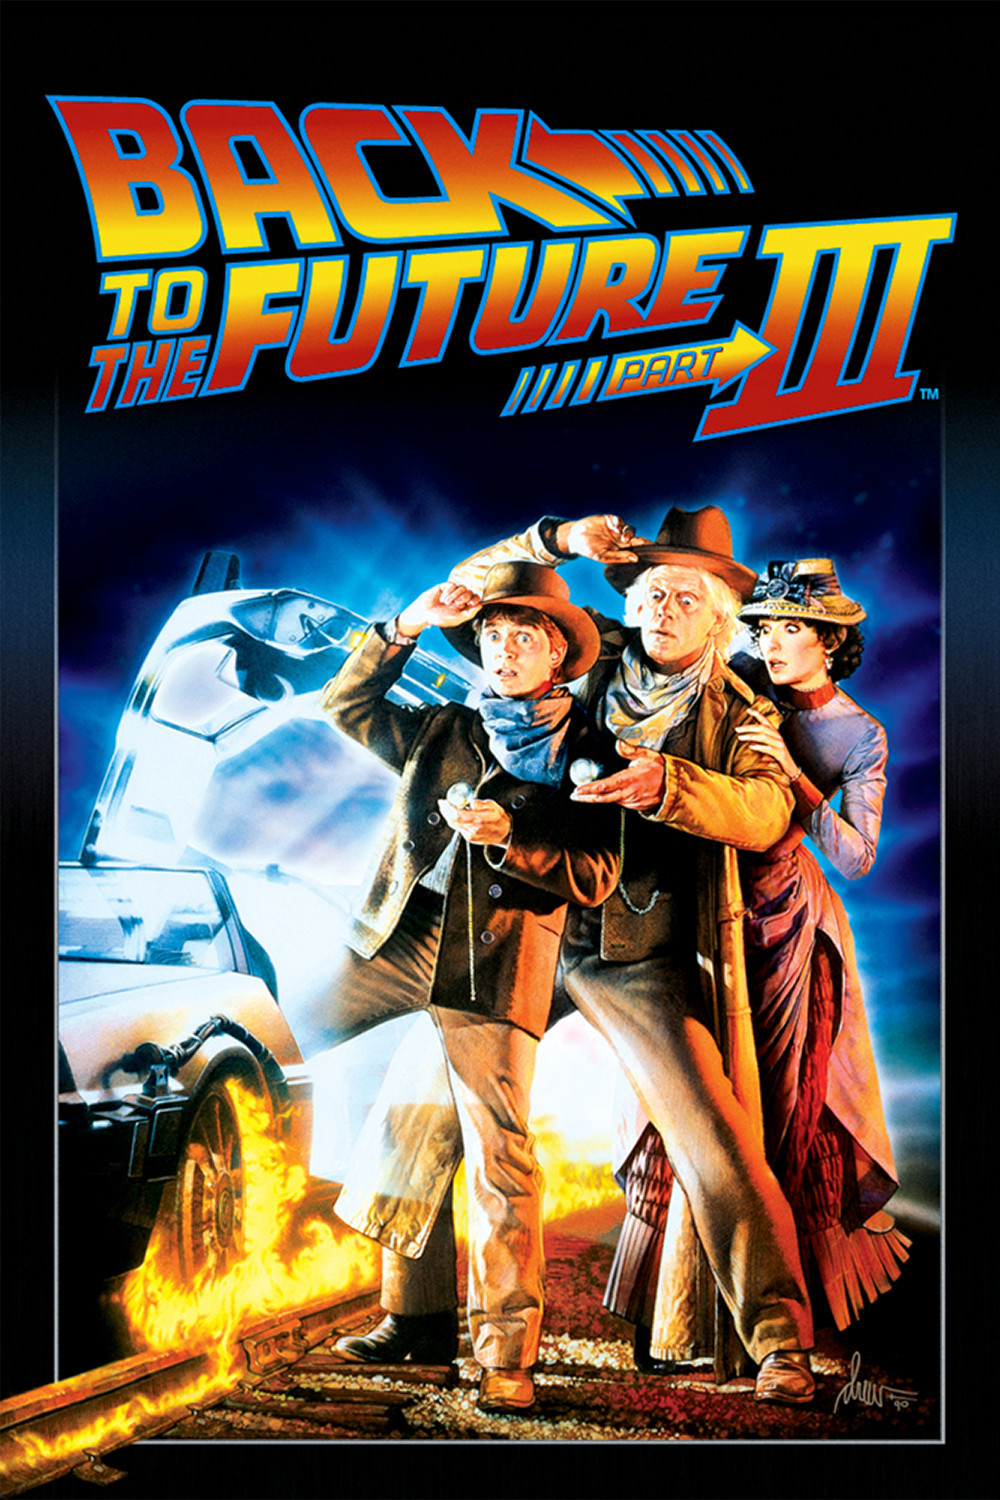 Back To The Future Part III HD wallpapers, Desktop wallpaper - most viewed